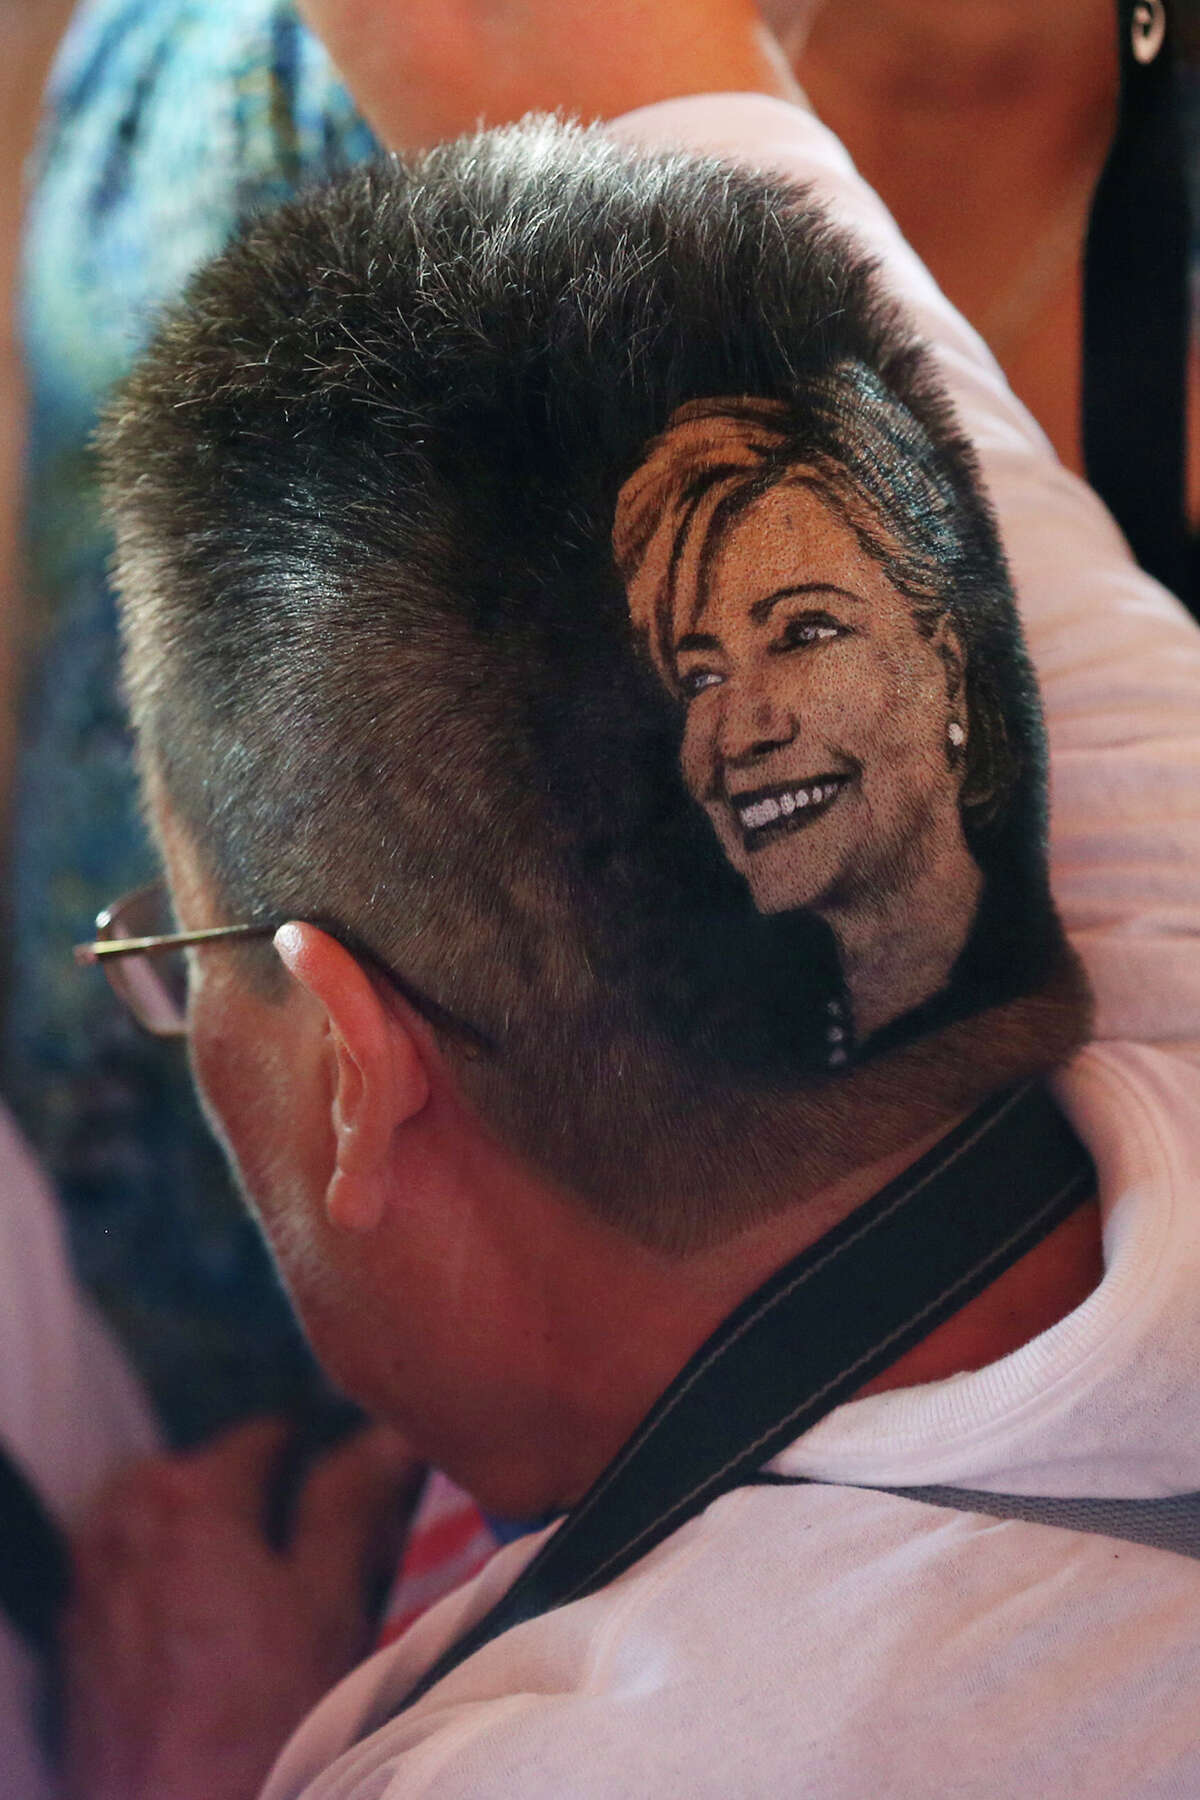 Maria Anita Monsivaiz sports a haircut in Democratic presidential candidate Hillary Clinton’s image during a rally for Clinton at Sunset Station. The crowd numbered in the thousands and was predominately Hispanic. Before the rally, Clinton attended a Q&A session with members of the U.S. Hispanic Chamber of Commerce. The haircut was the design of local barber, Rob the Original.